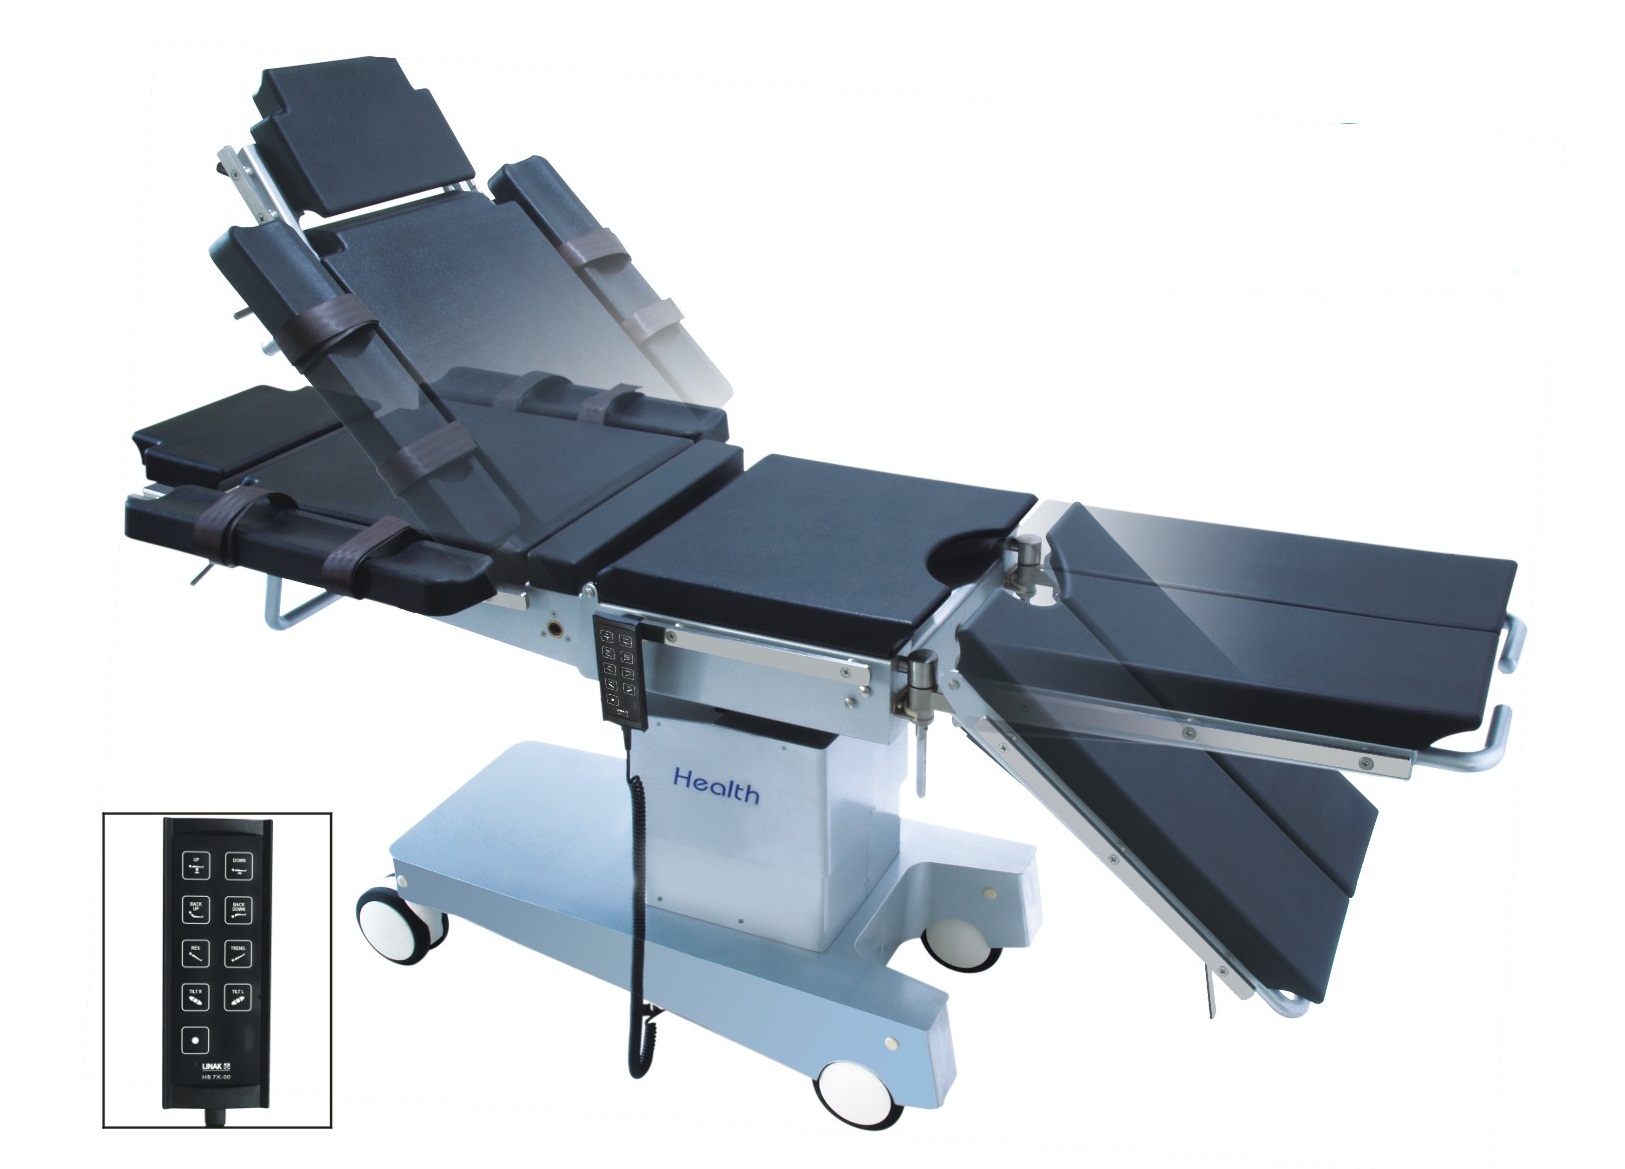 Health Operating Table TDG 1